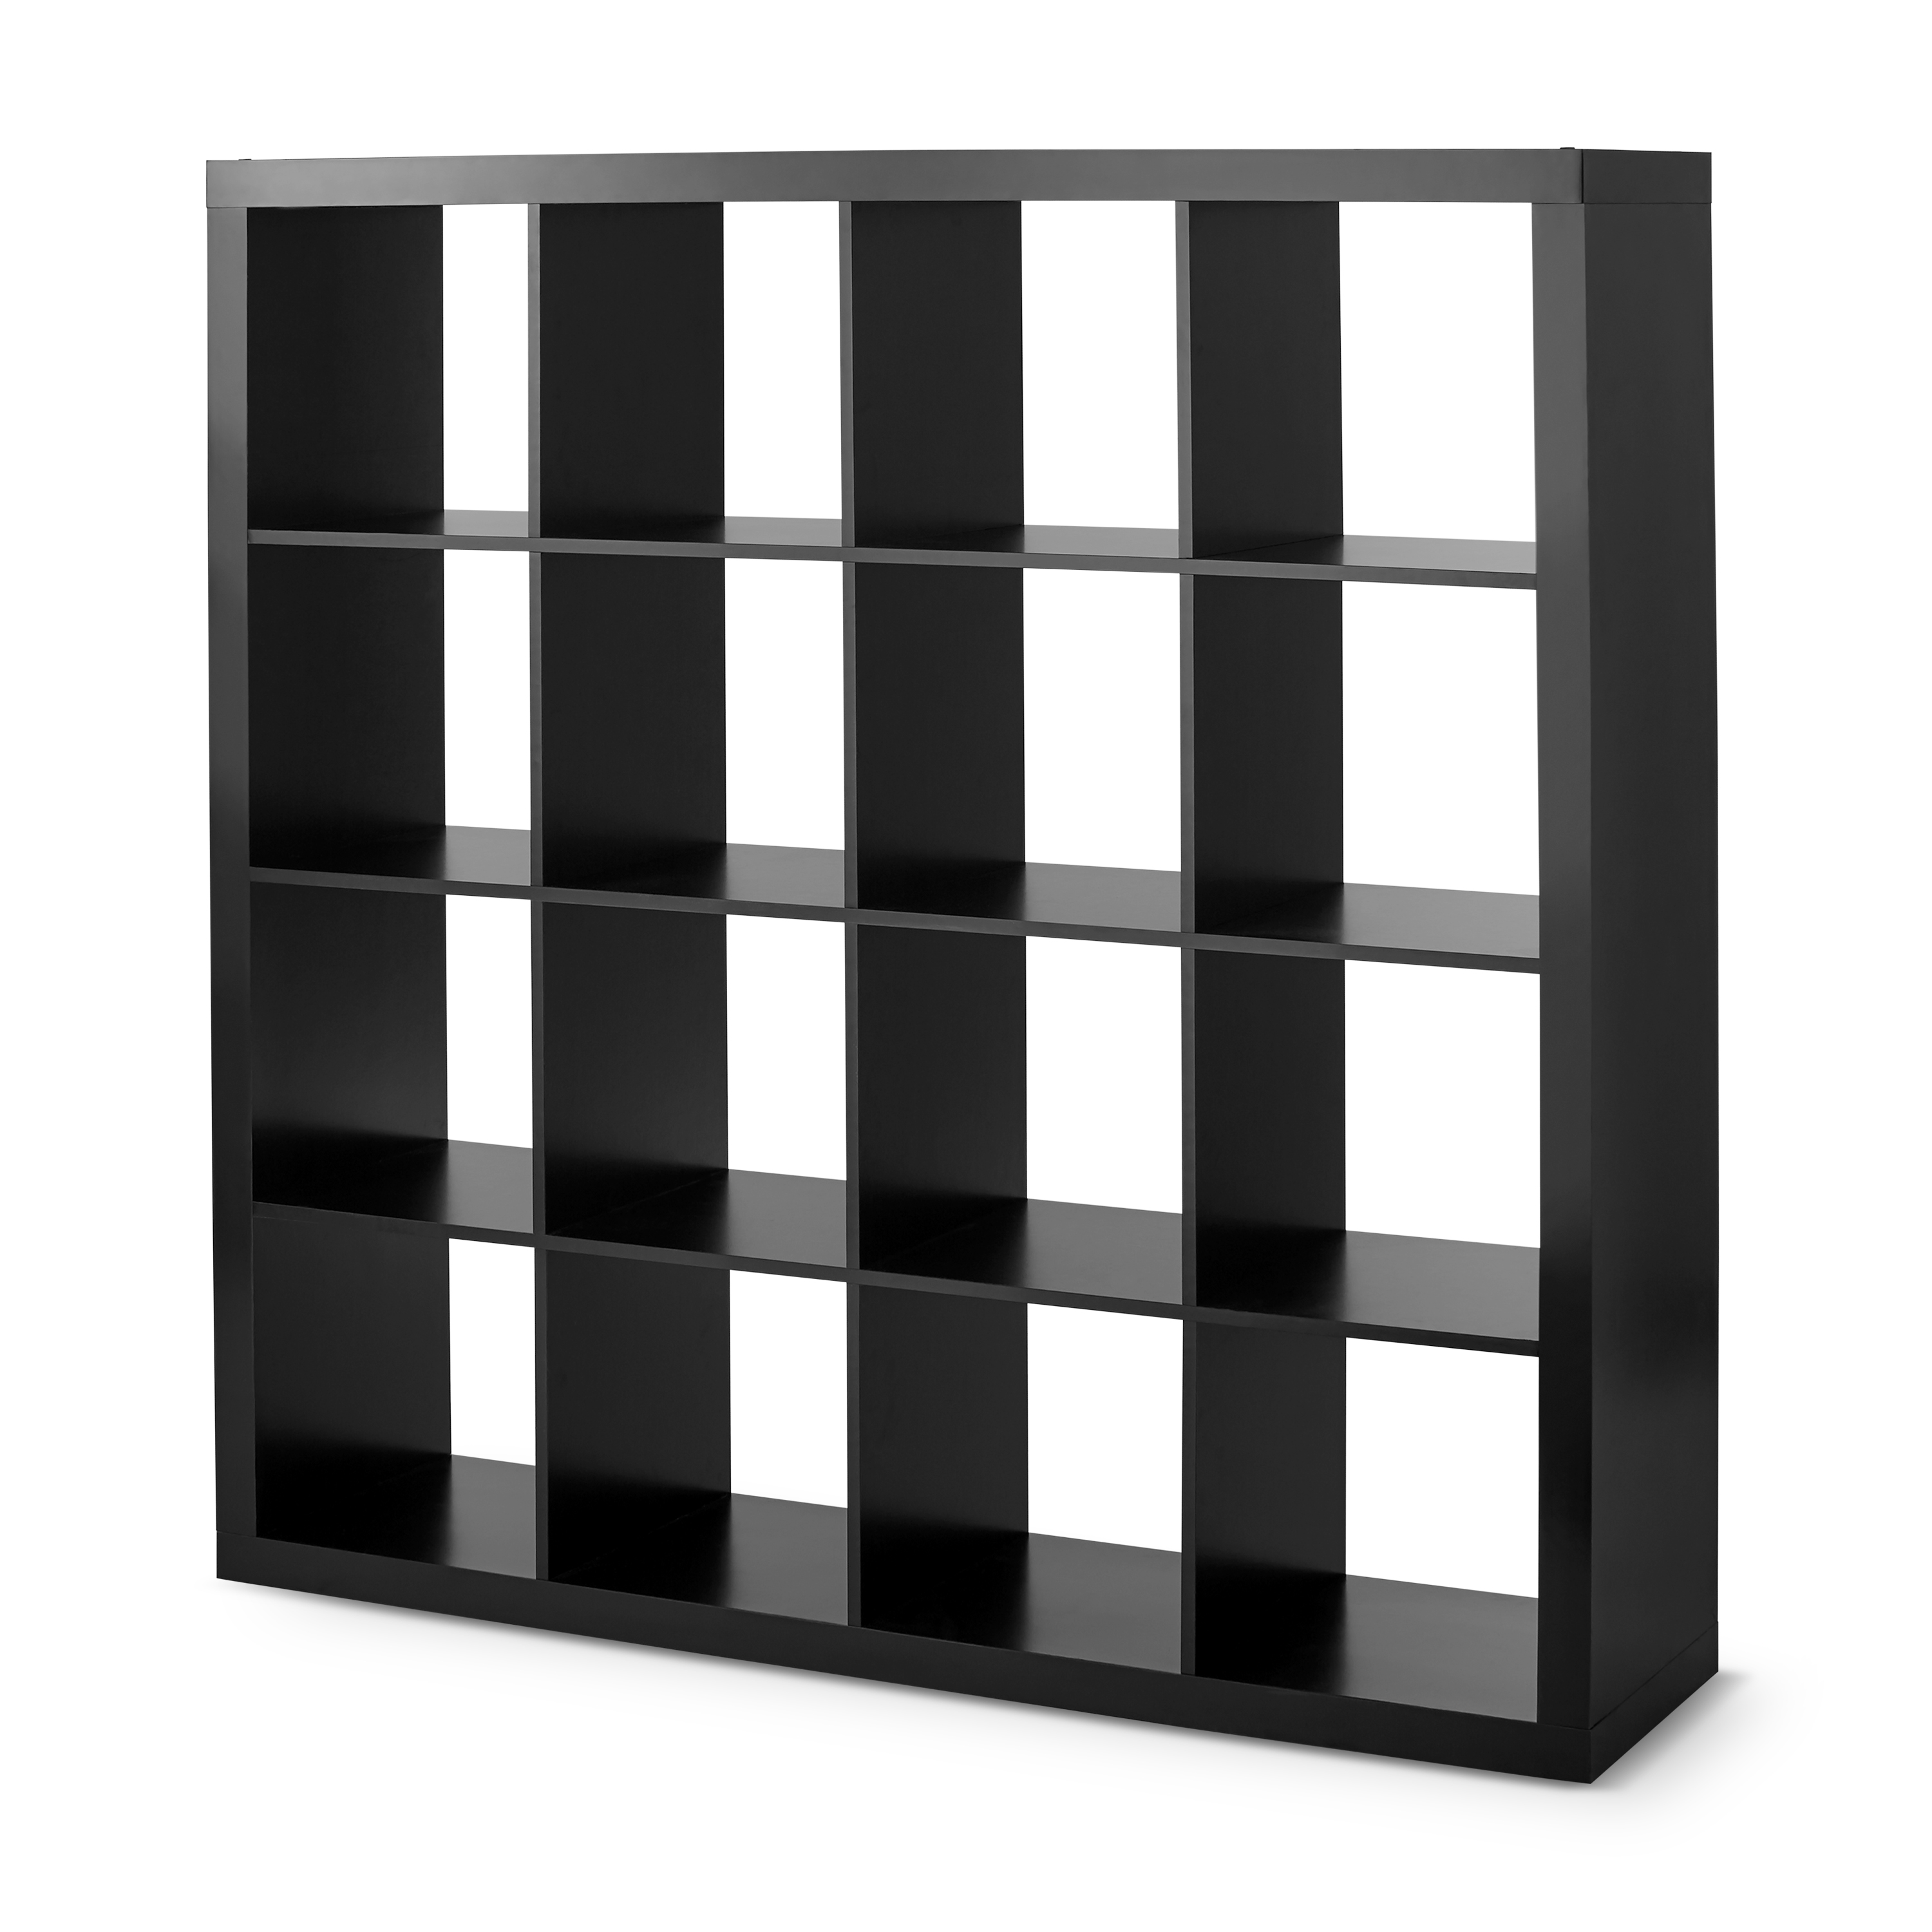 Better Homes & Gardens 16-Cube Storage Organizer, Solid Black - image 1 of 6